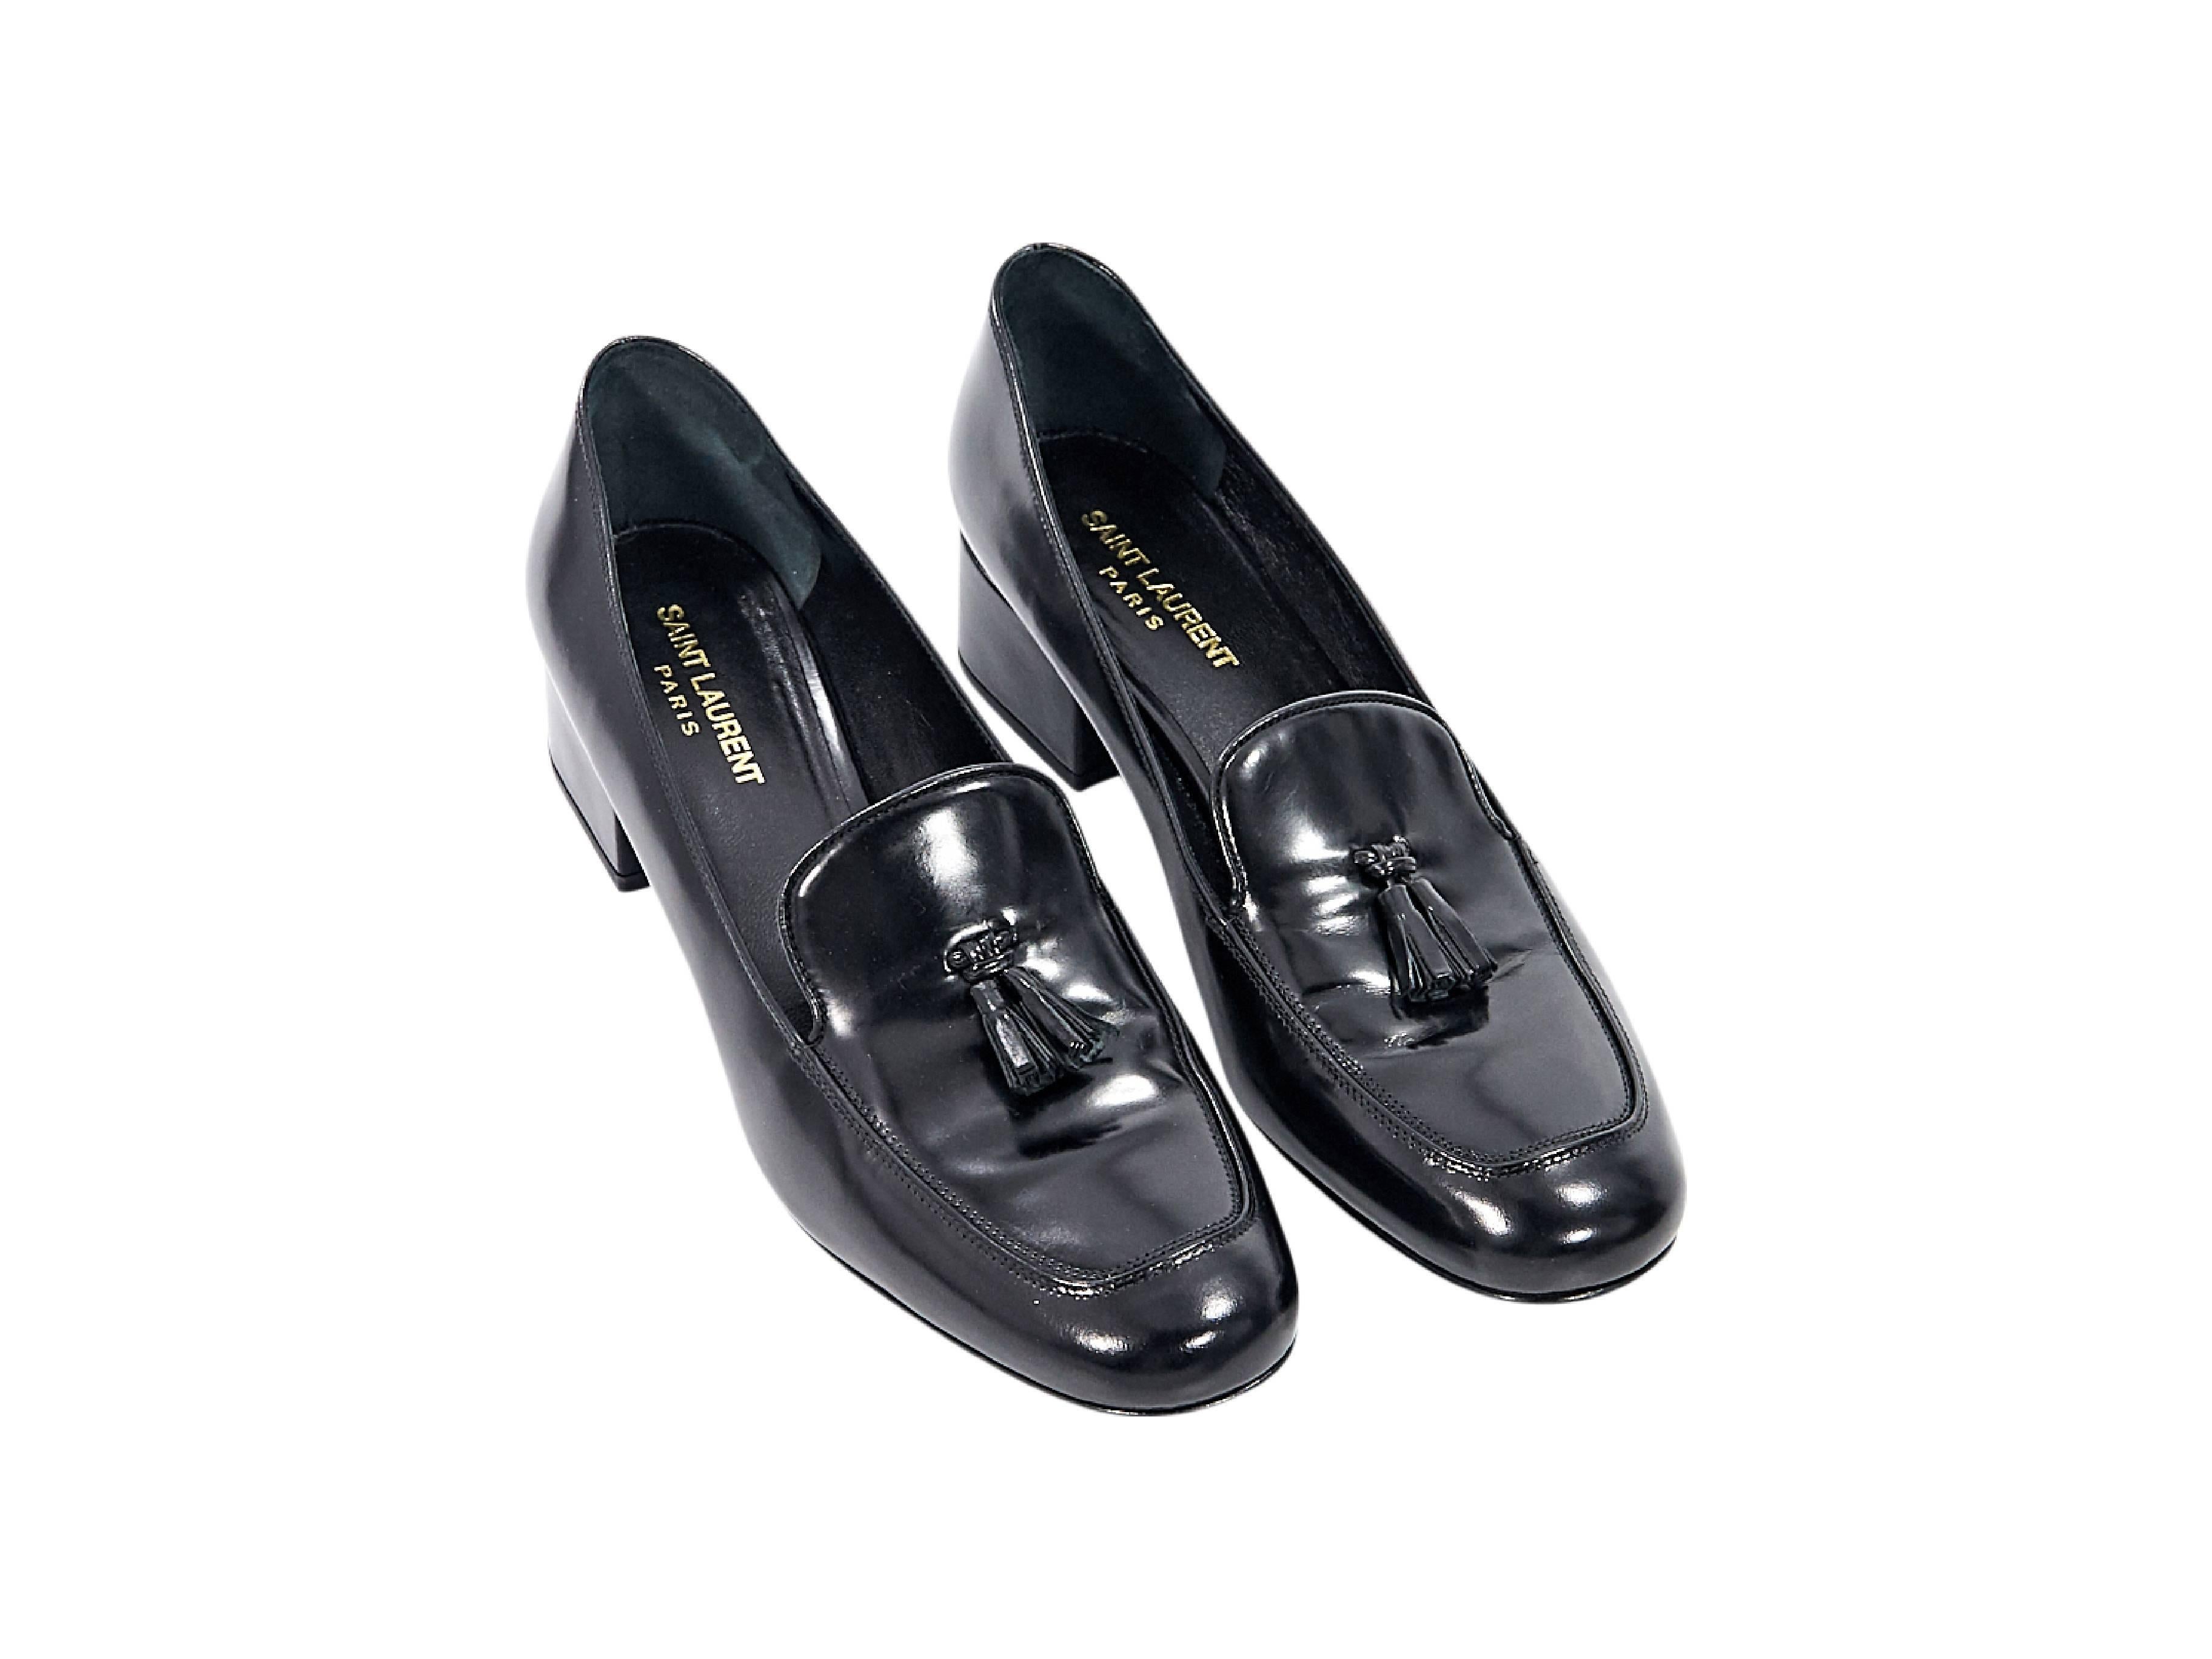 Product details:  Black leather Montaigne loafers by Yves Saint Laurent.  Accented with tassels.  Round moc toe.  Low block heel.  Slip-on style. Size 10
Condition: Pre-owned. Very good.

Est. Retail $ 795.00

